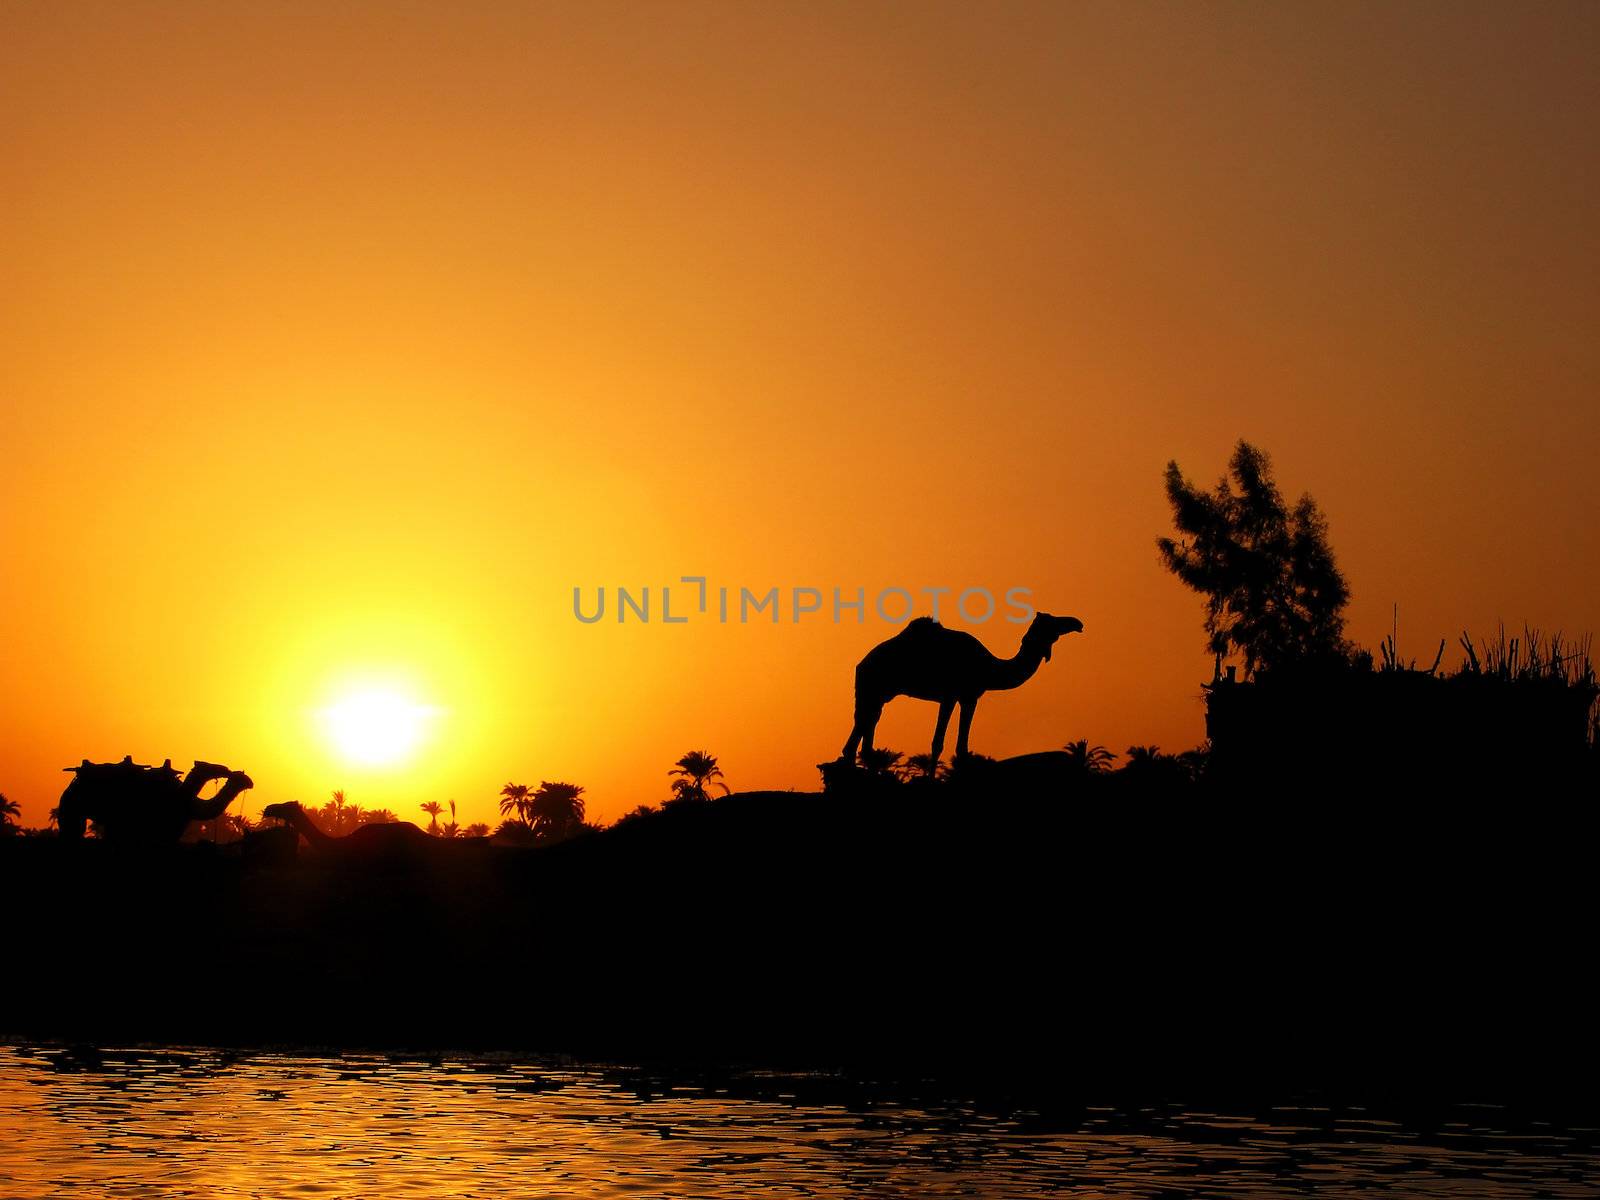 Silhouette of the camel against sunset on Nile in Egypt
